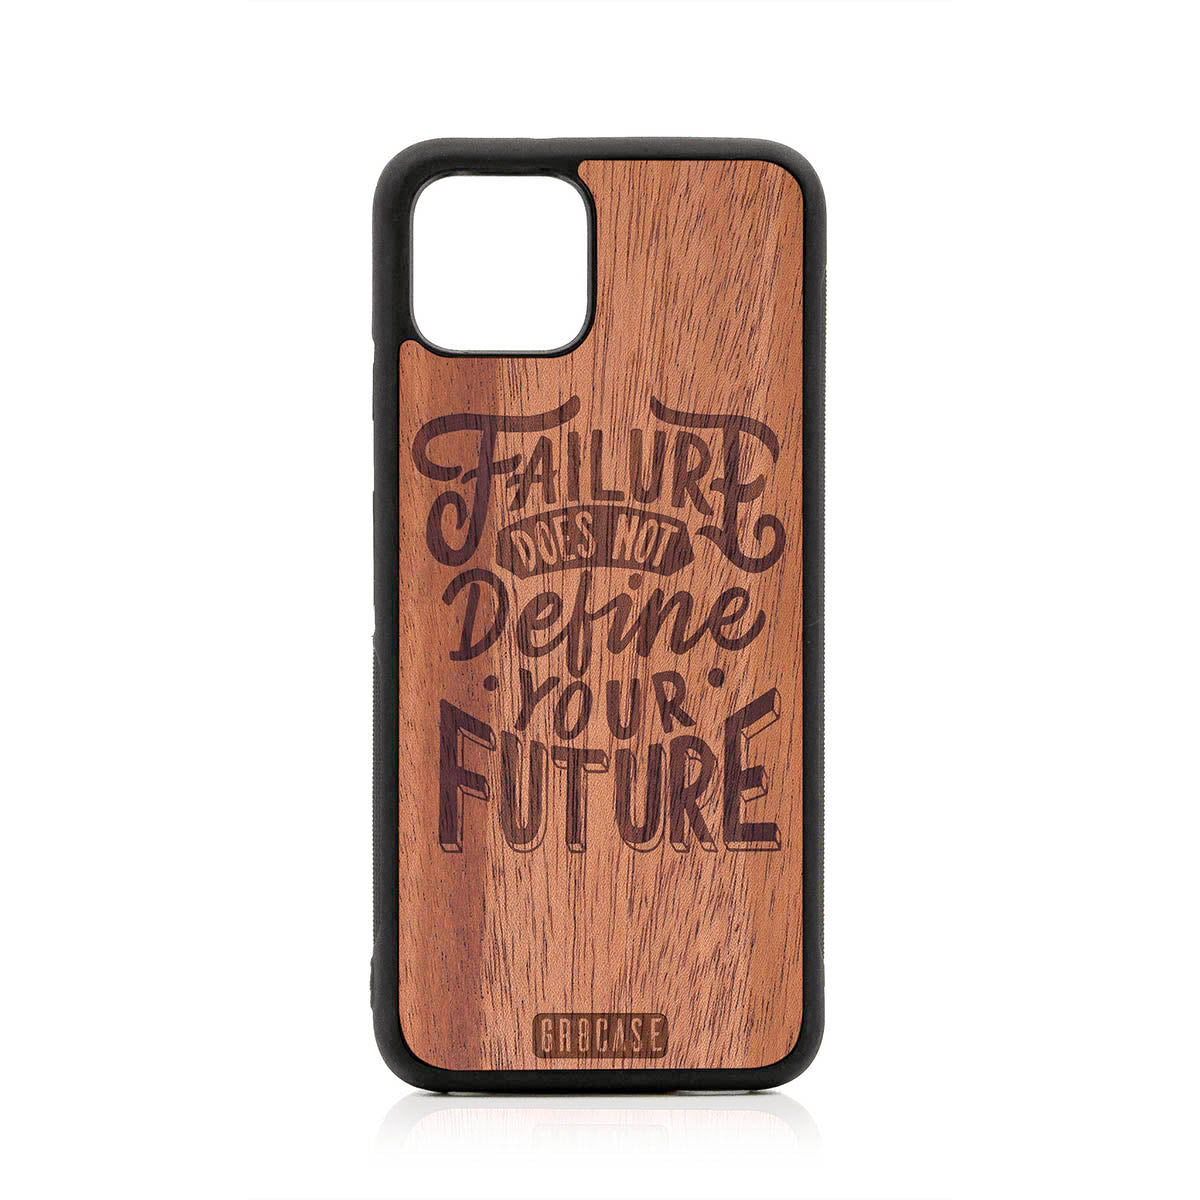 Failure Does Not Define You Future Design Wood Case For Google Pixel 4 by GR8CASE